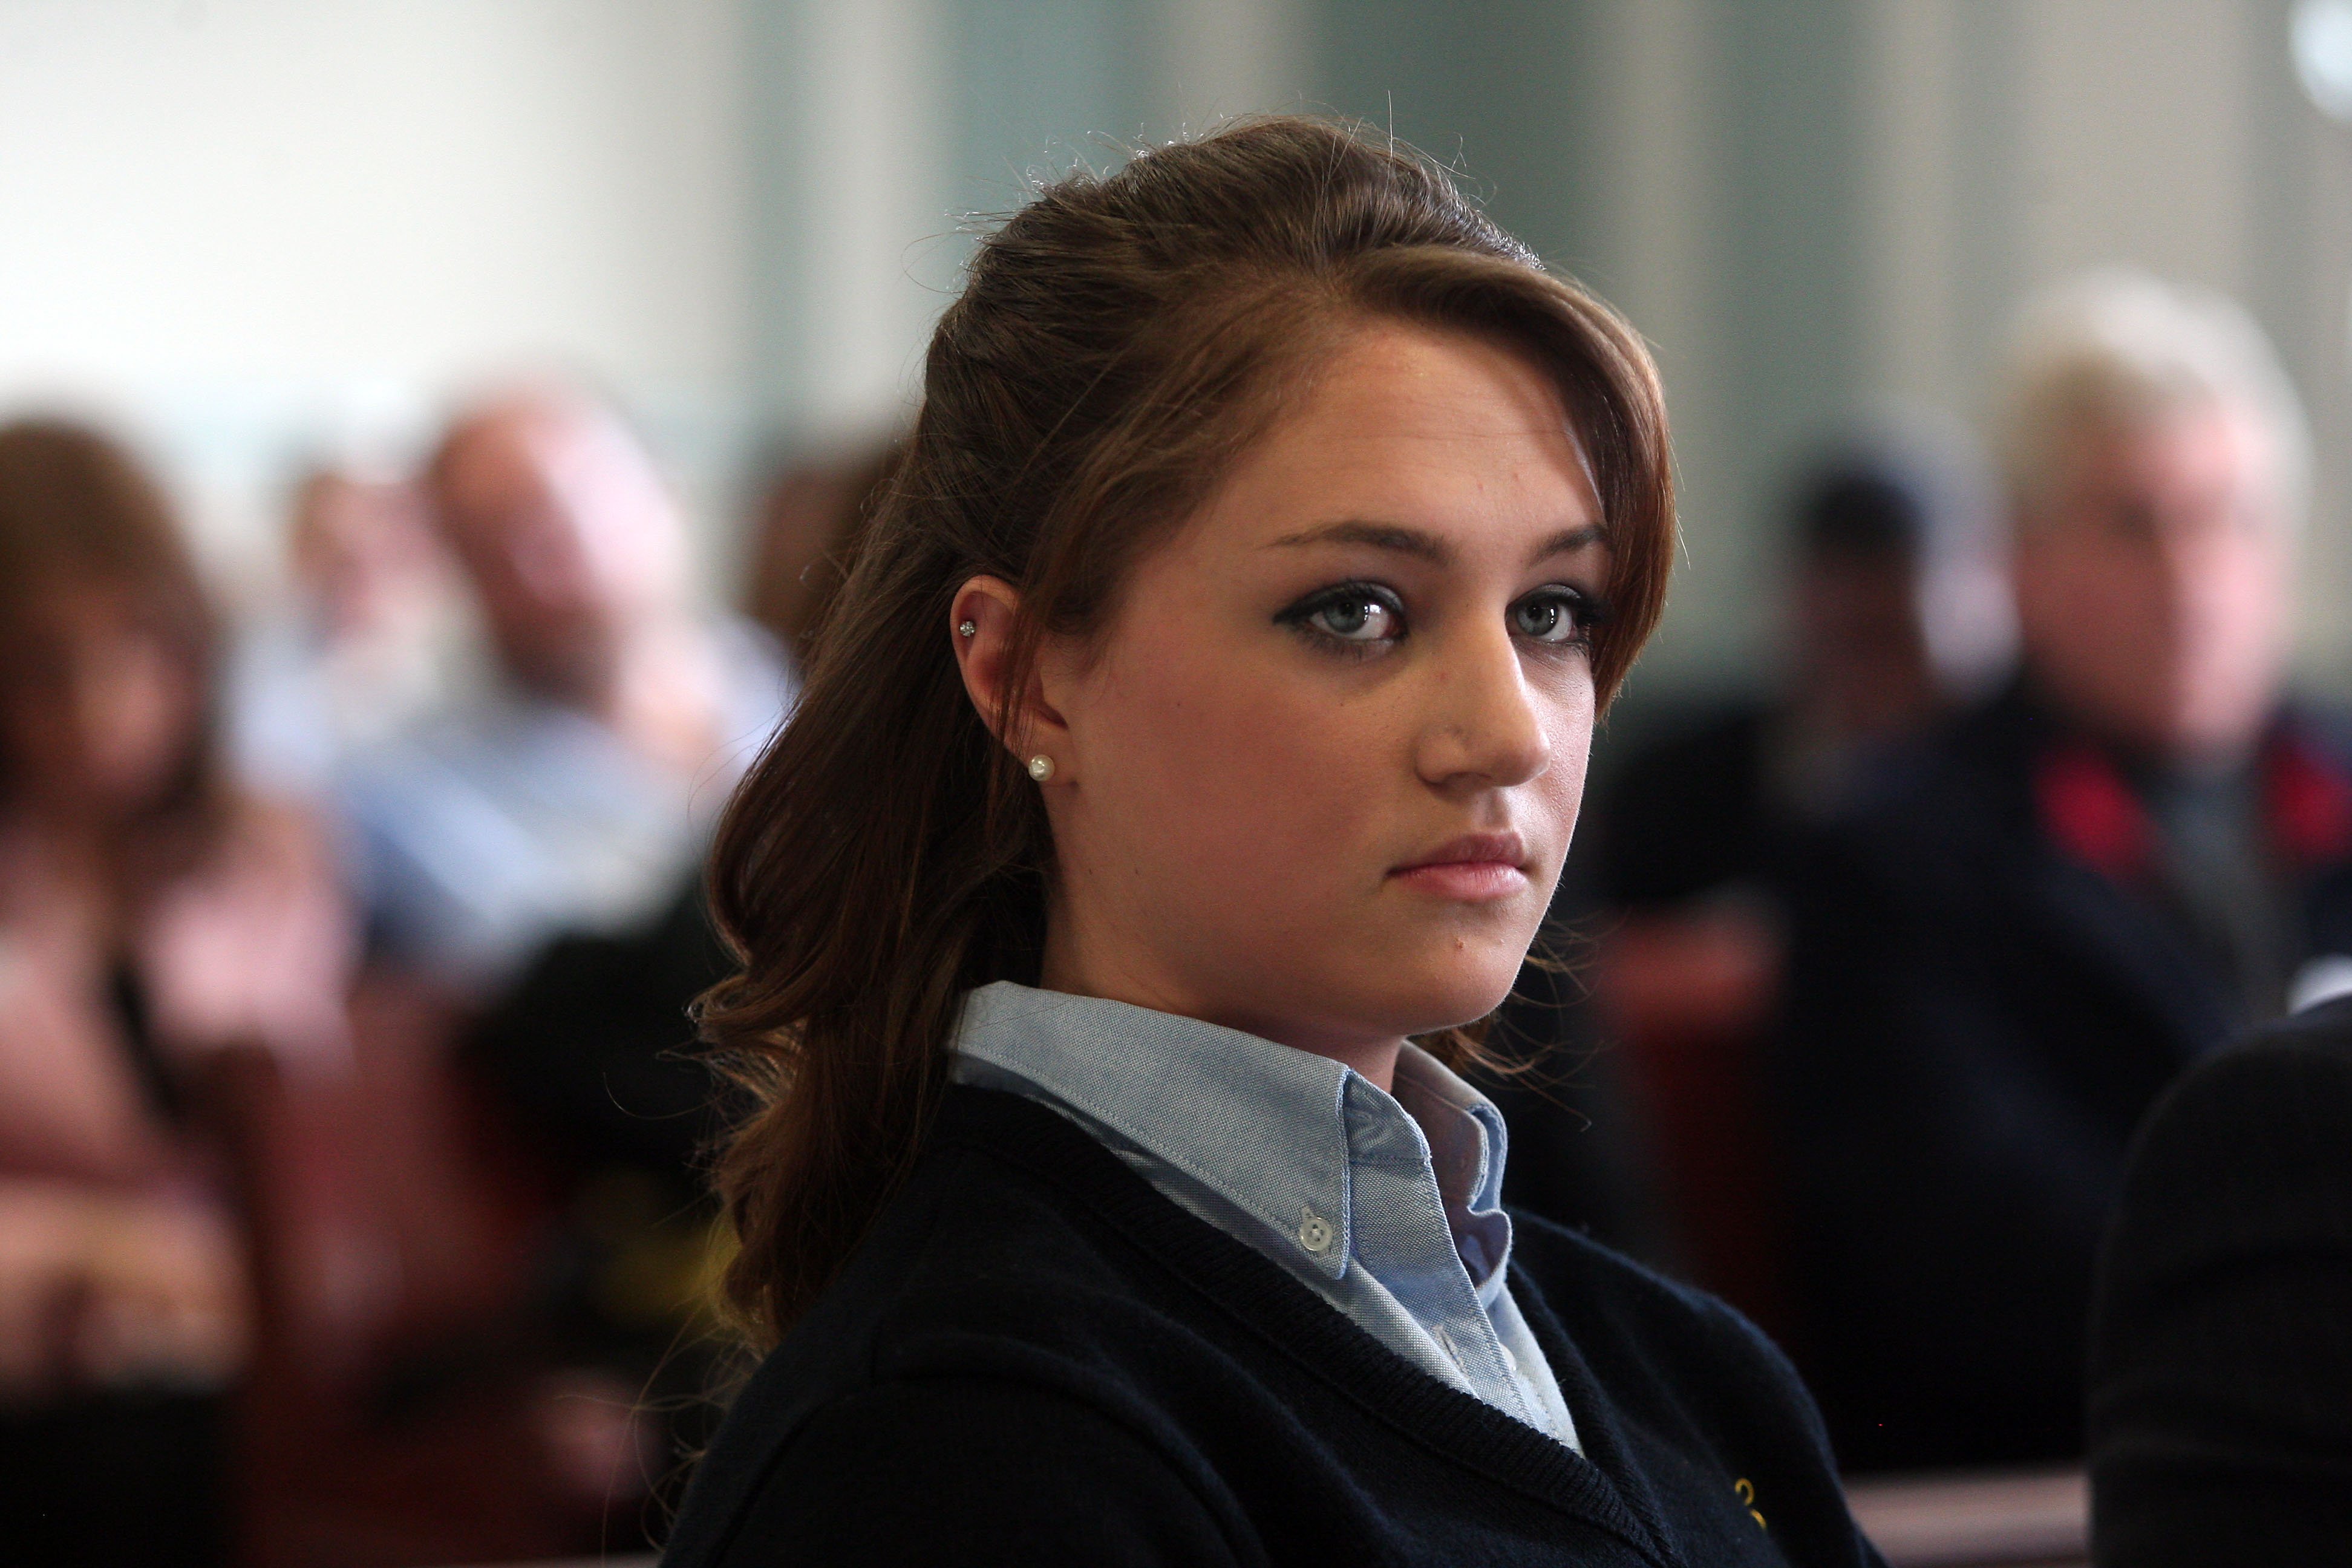 High school senior Rachel Canning, 18, appears in Morris County Superior Court in Morristown, N.J., on March 4, 2014. (Bob Karp—Daily Record/AP)